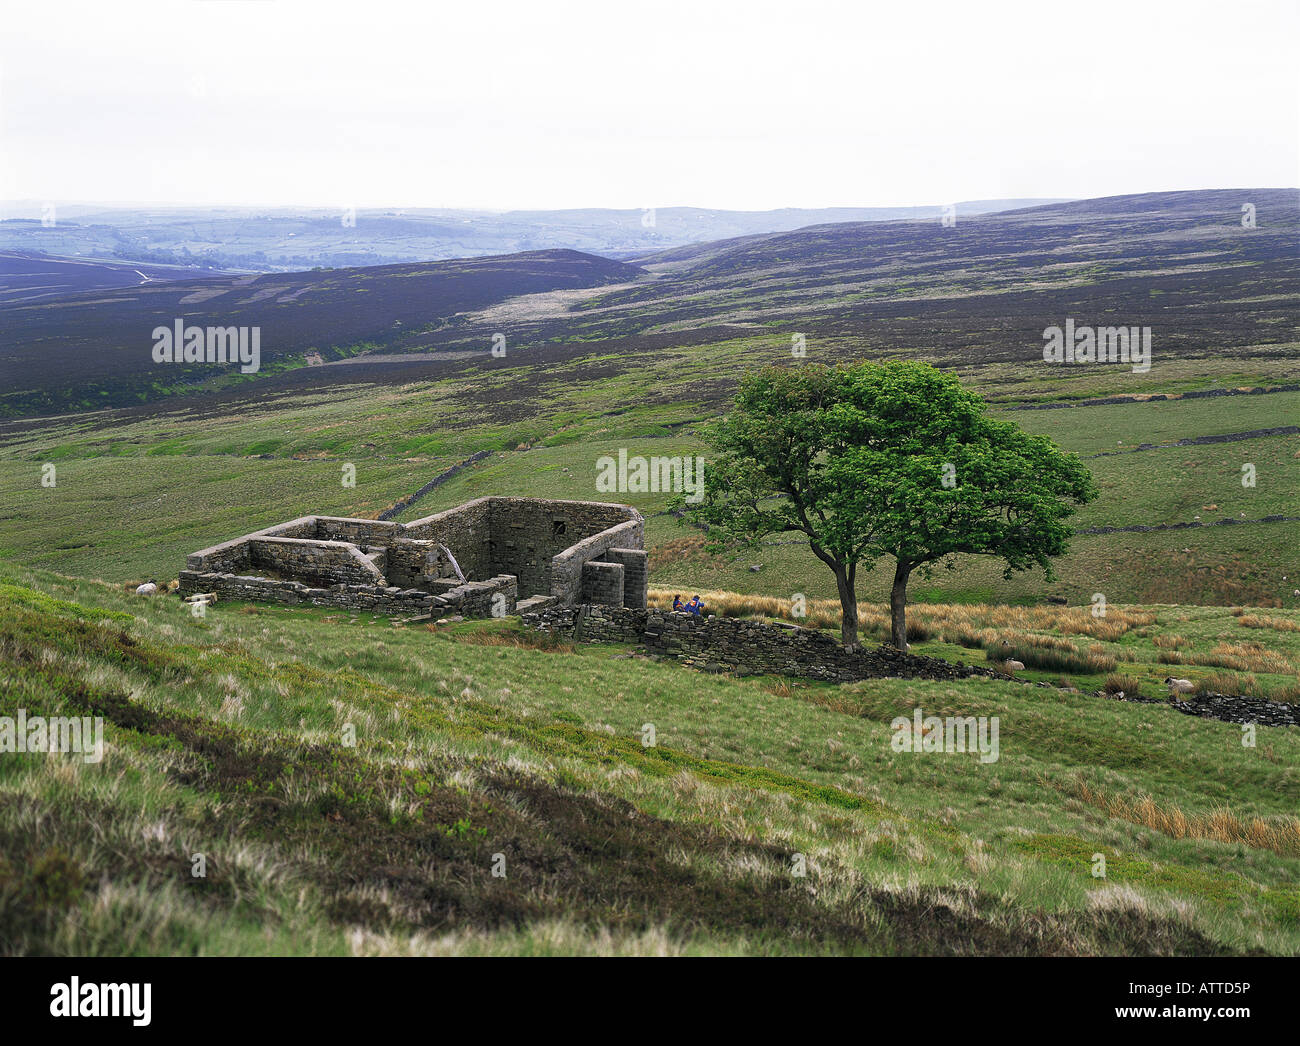 Impostazione per Charlotte Bronte romanzo Wuthering Heights, Yorkshire Dales, Inghilterra Foto Stock